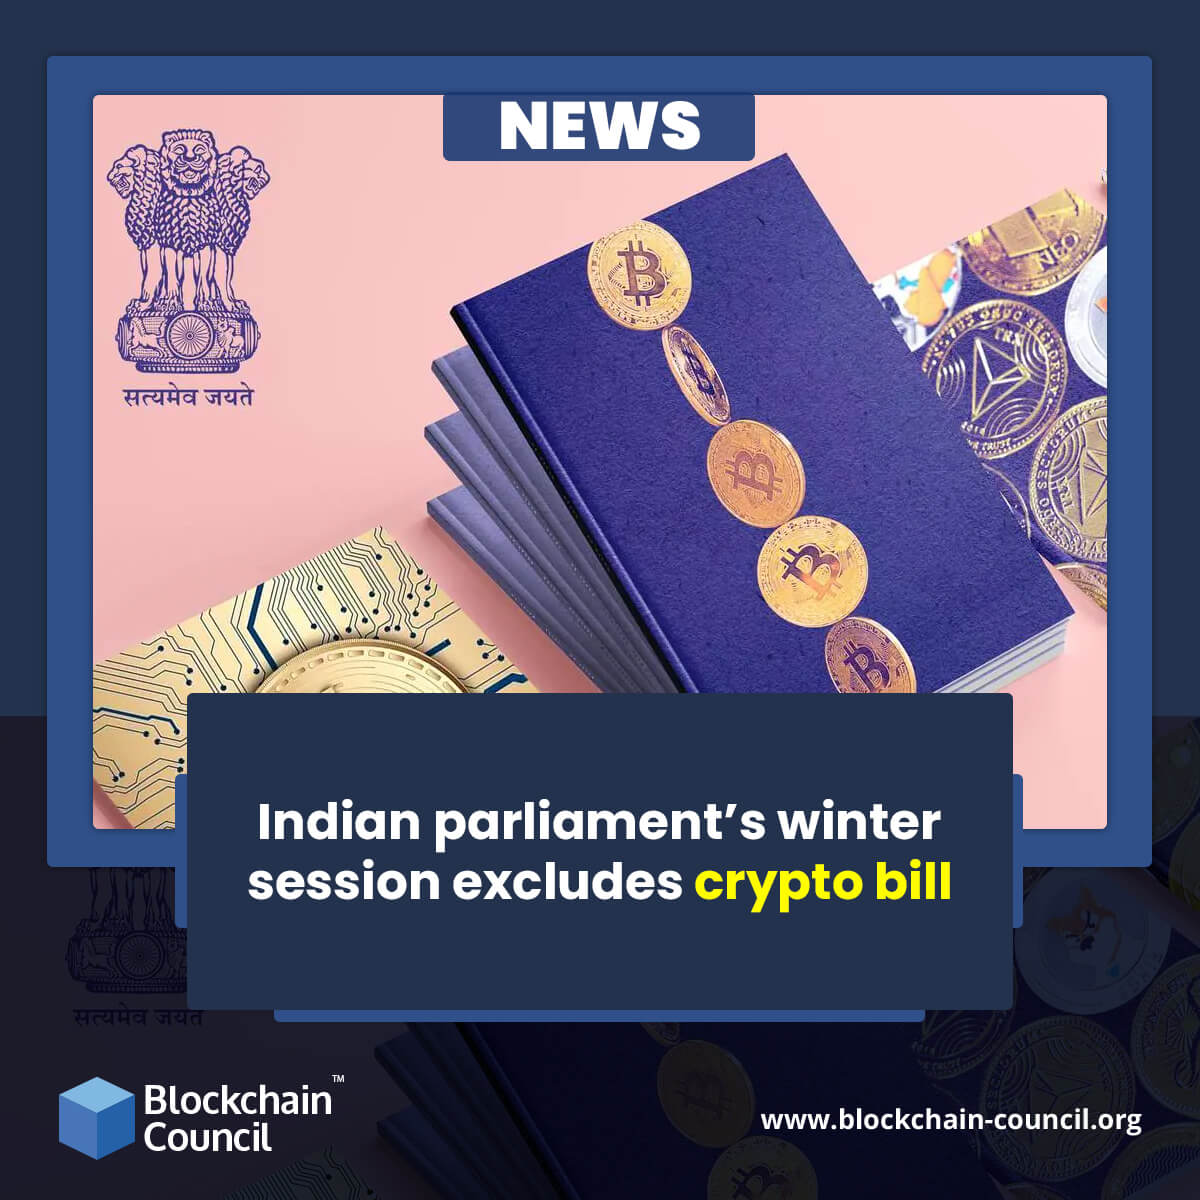 Indian parliament’s winter session excludes crypto bill